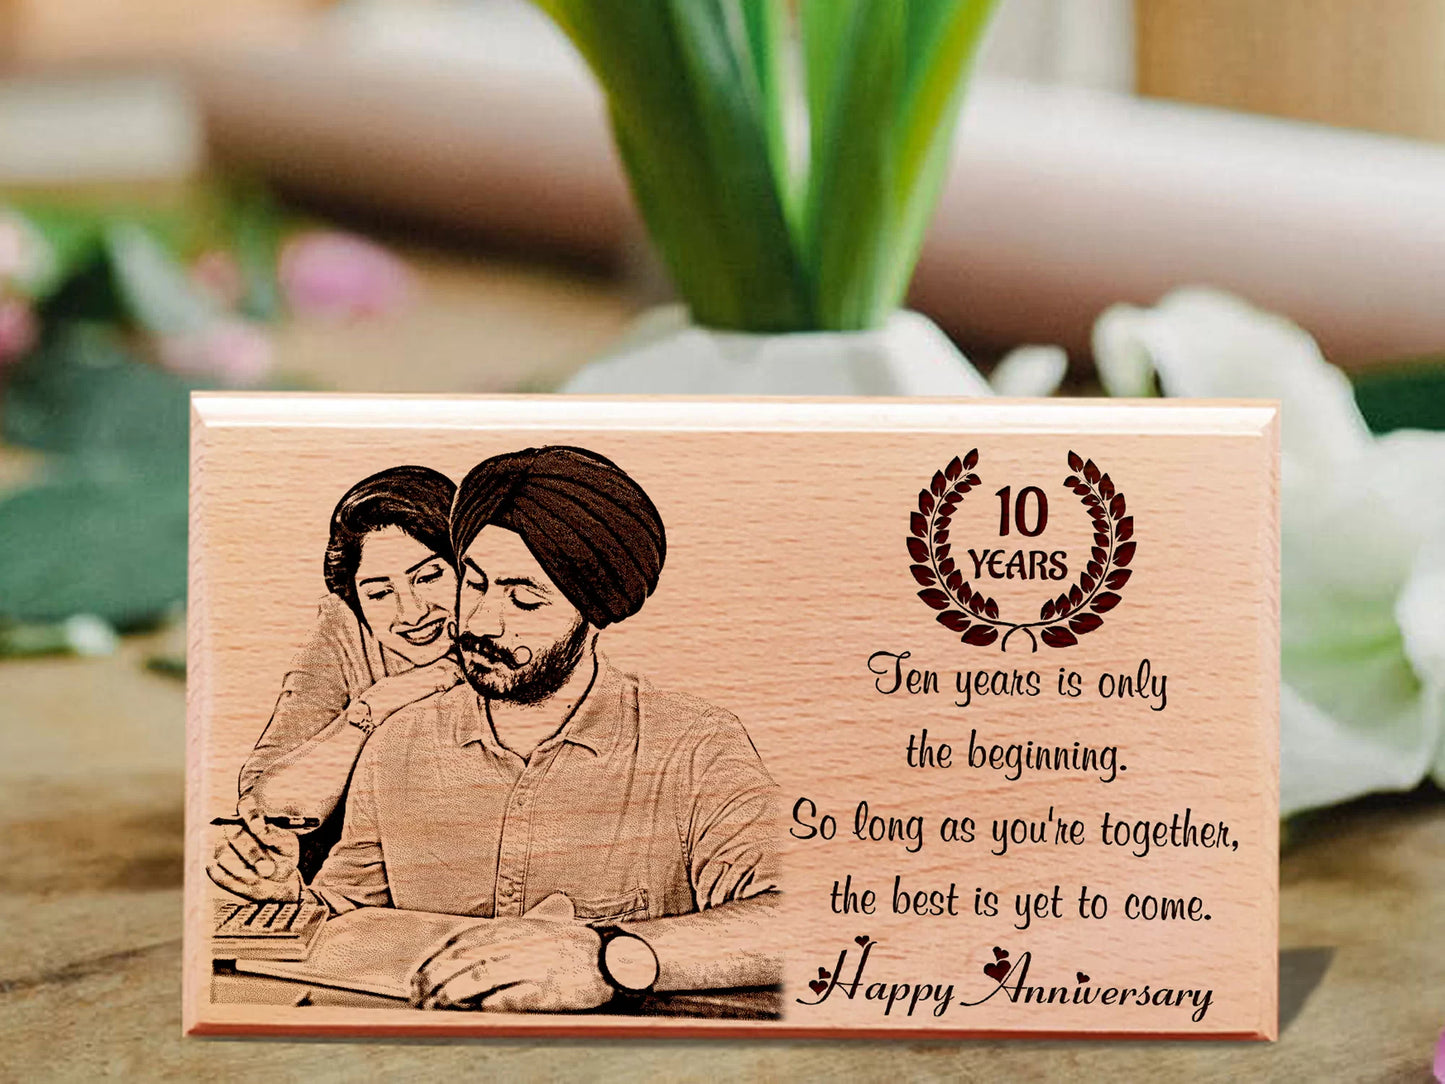 Personalized Engraved Wooden Photo Frame Anniversary Gift for Couples (6×4 inches)